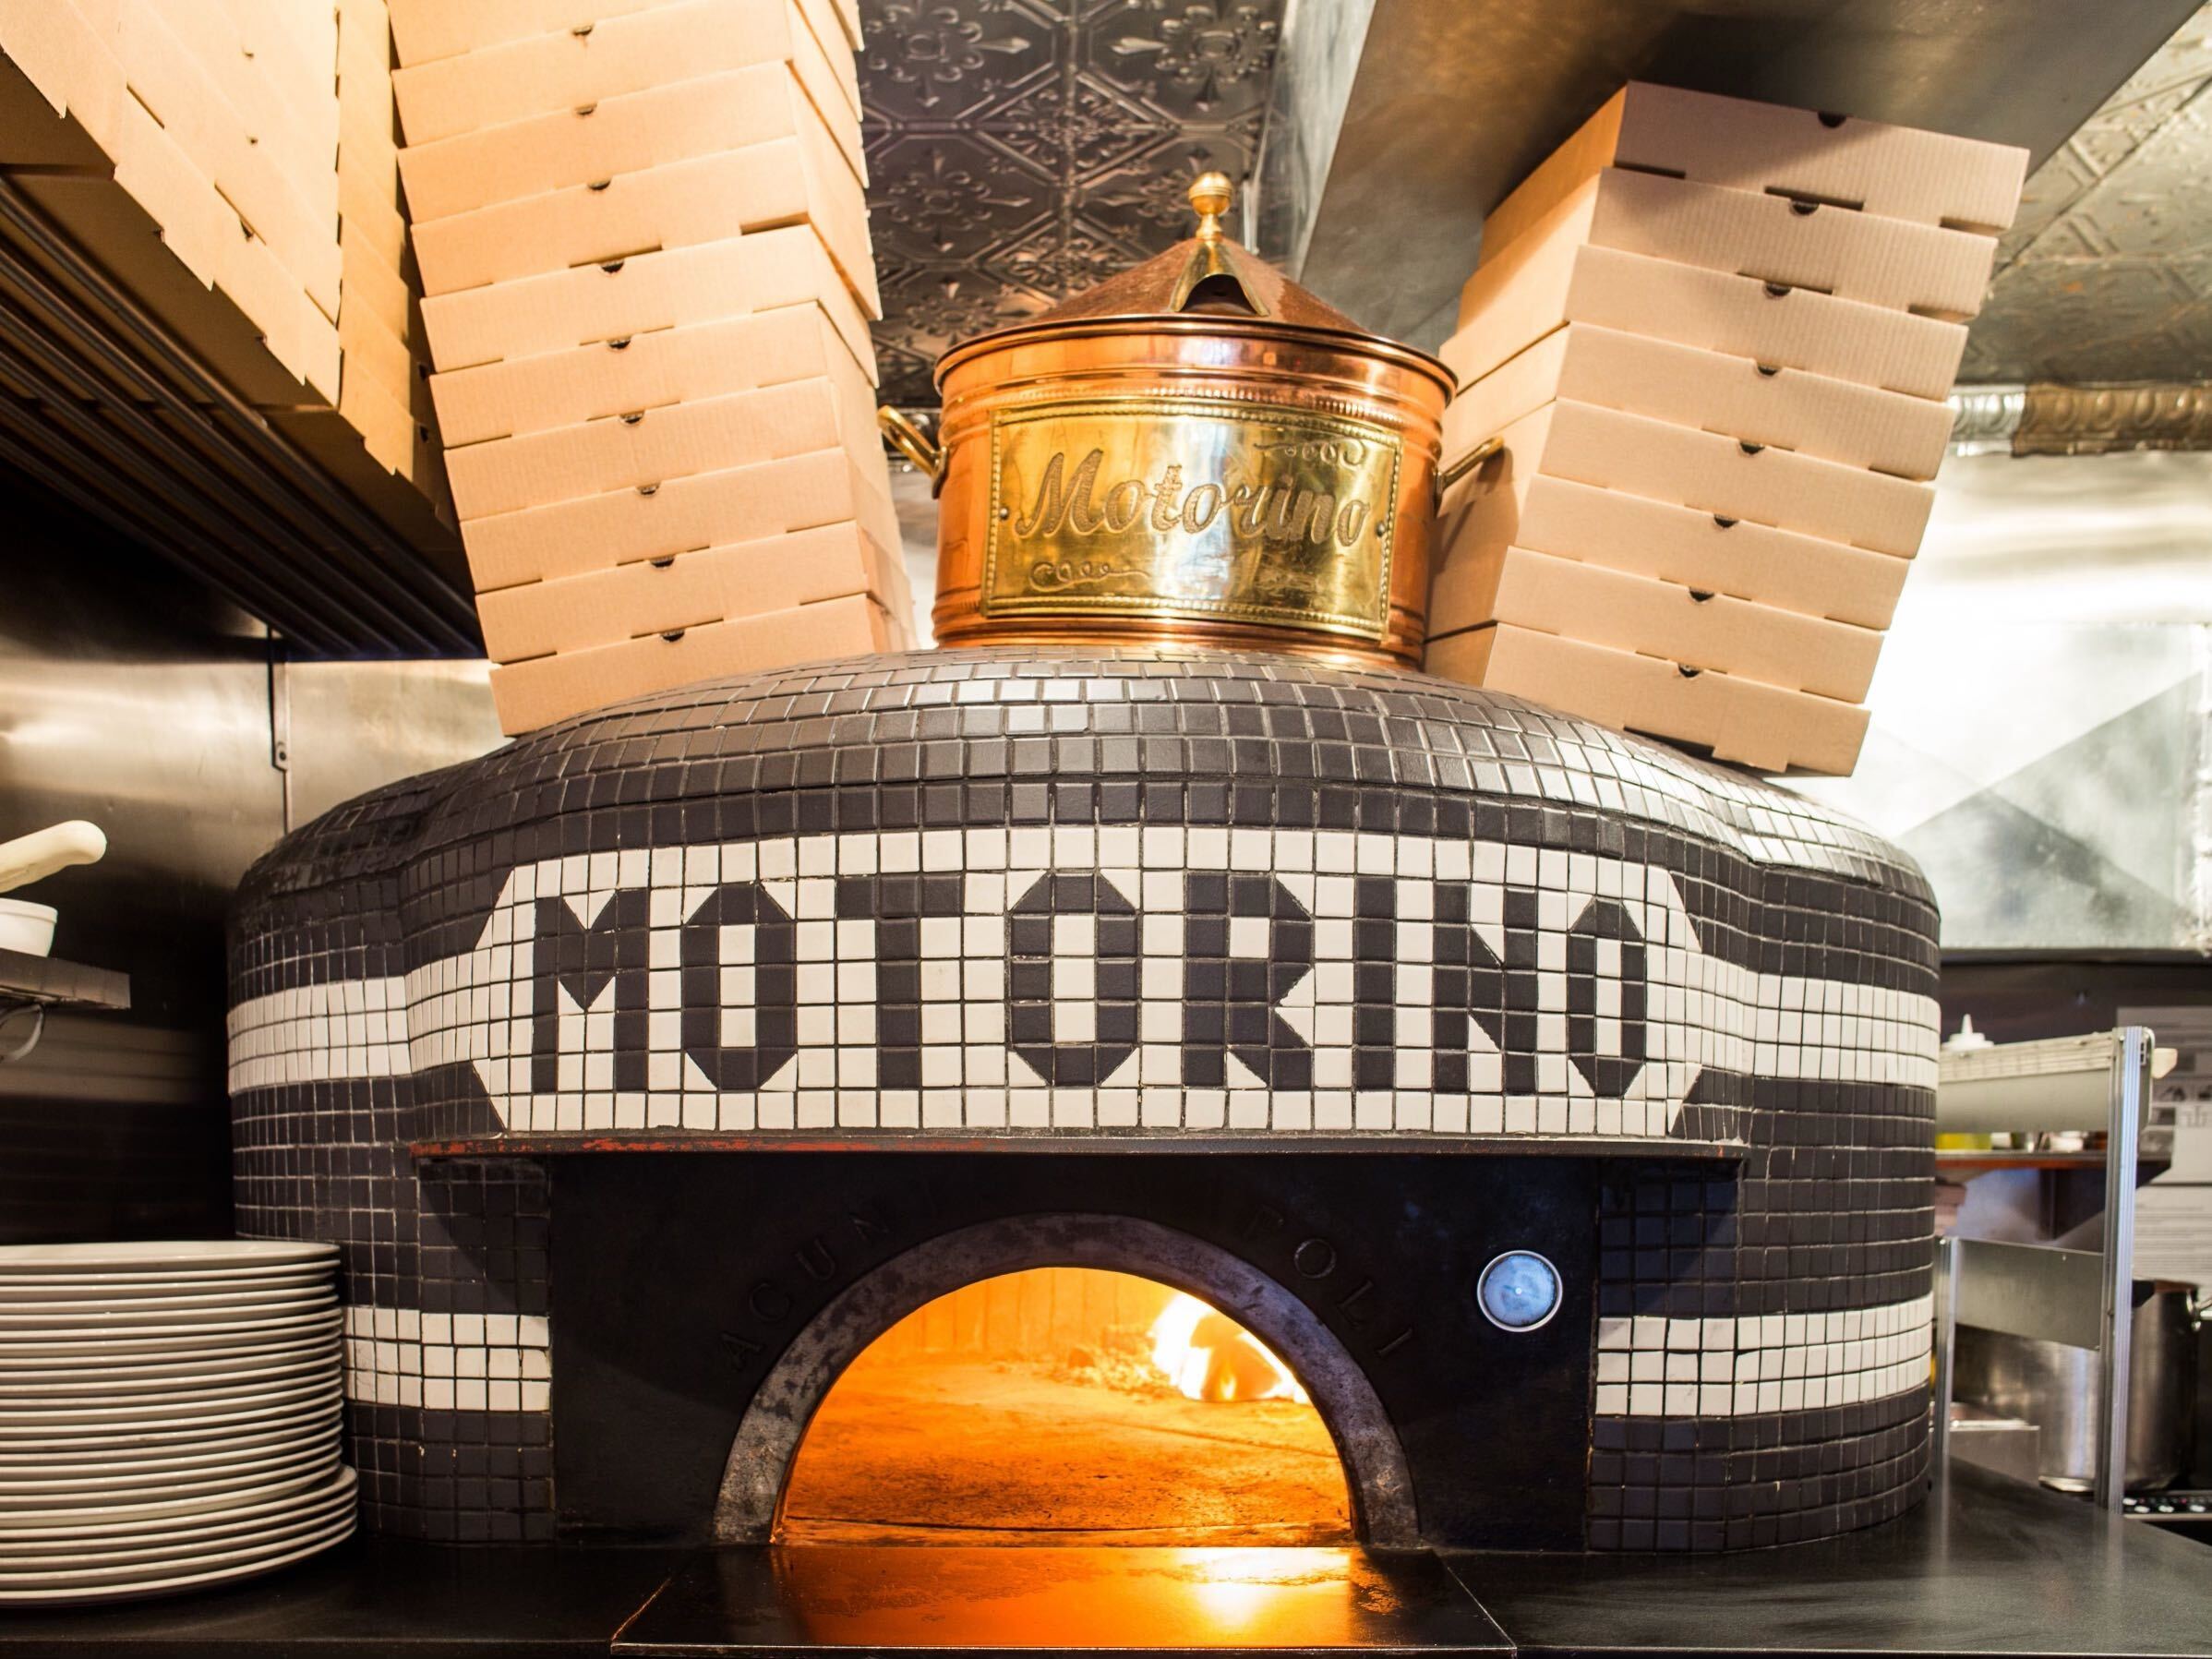 A wood-fired oven with "Motorino" written on it.